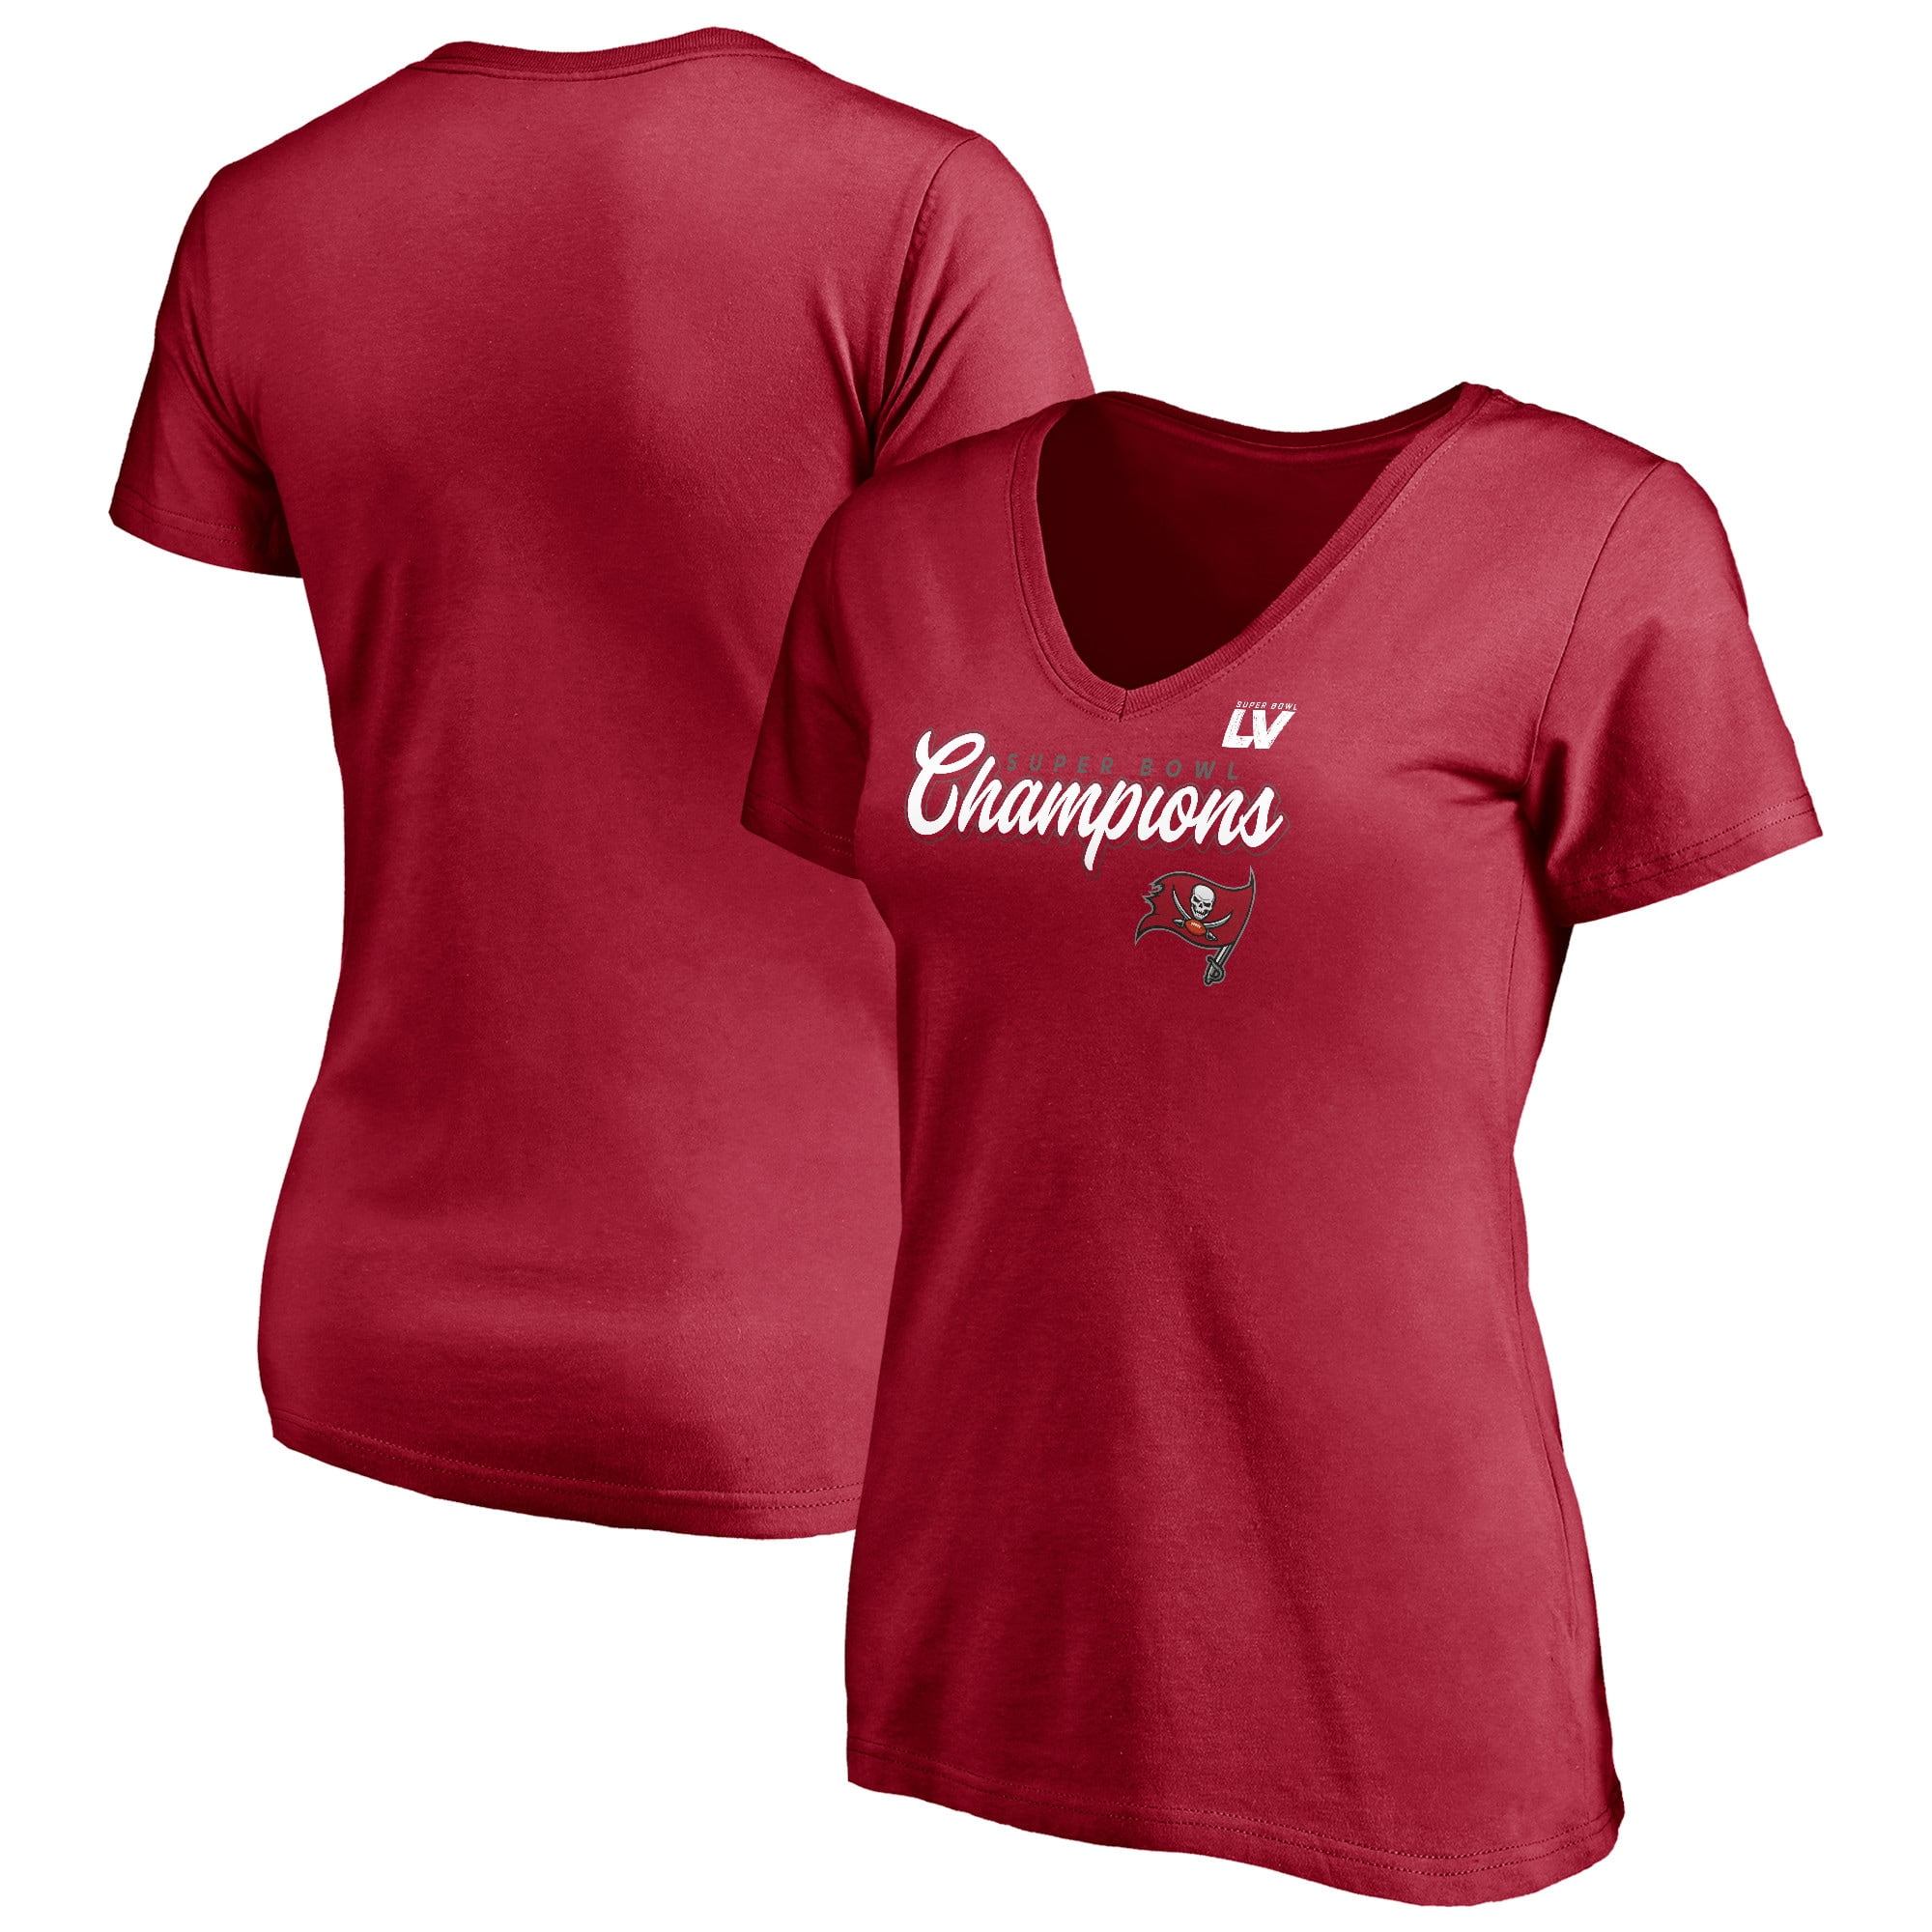 Women's Fanatics Branded Red Tampa Bay Buccaneers Super Bowl LV Champions Hail Mary V-Neck T-Shirt